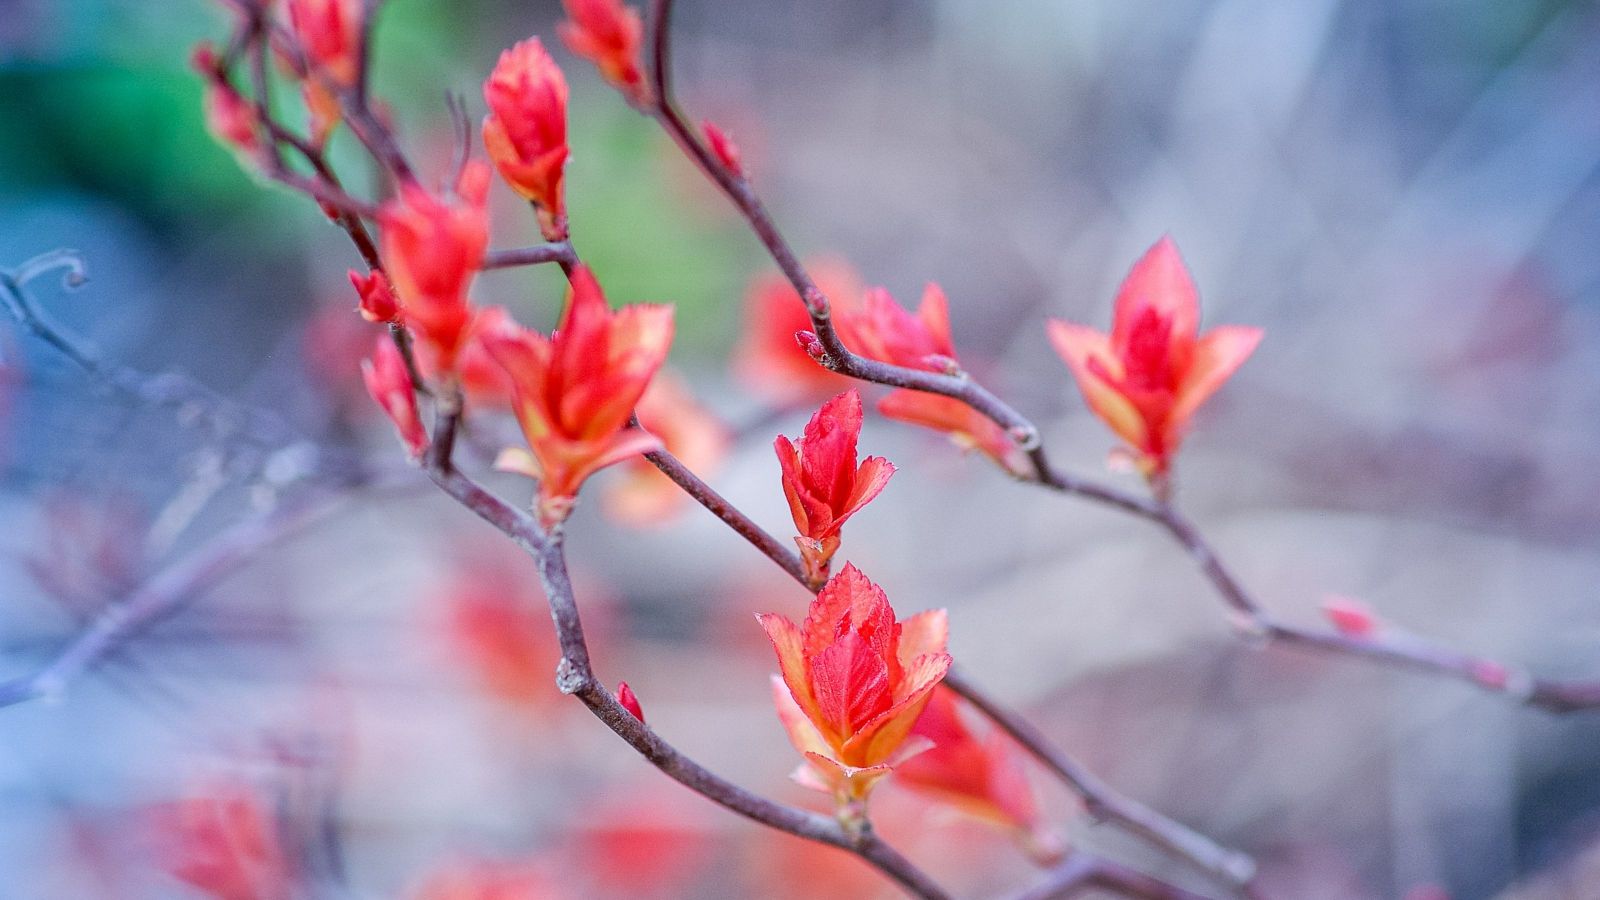 Clusters of red leaves opening off thin branches with a blue grey background.